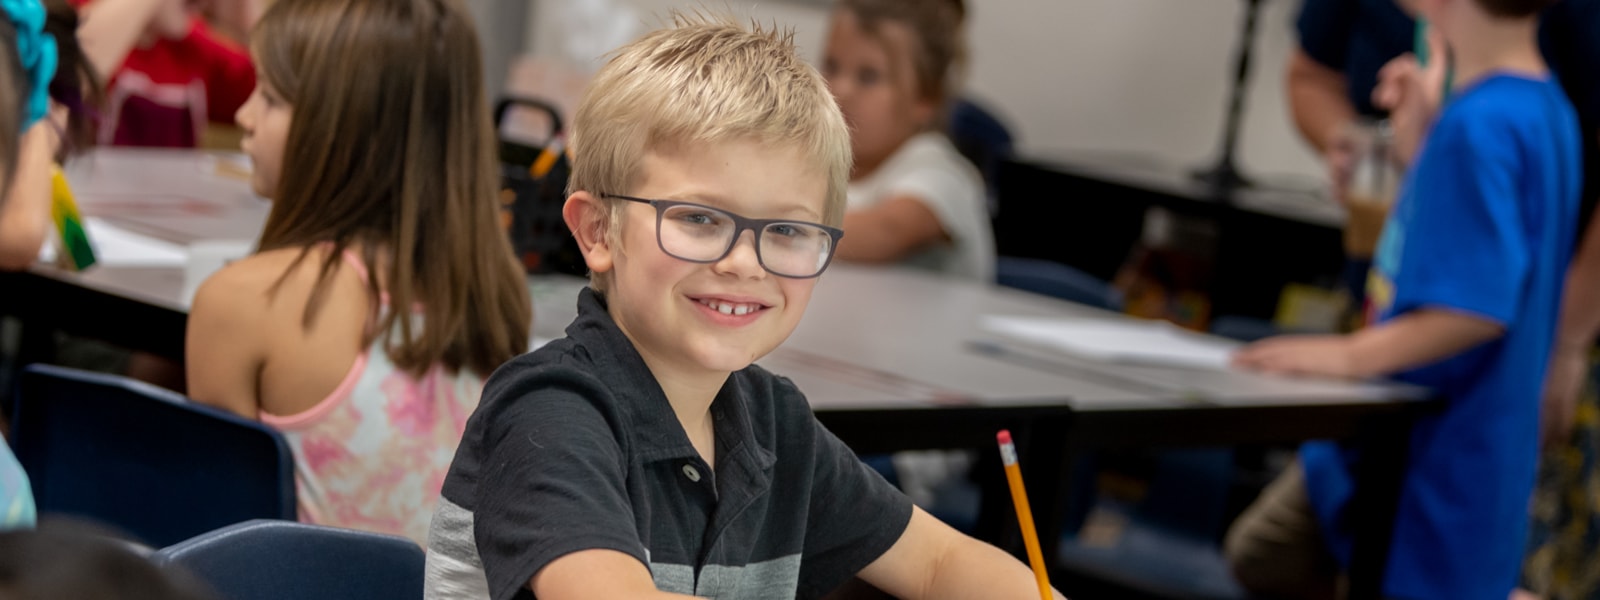 Student in a classroom smiles for the camera